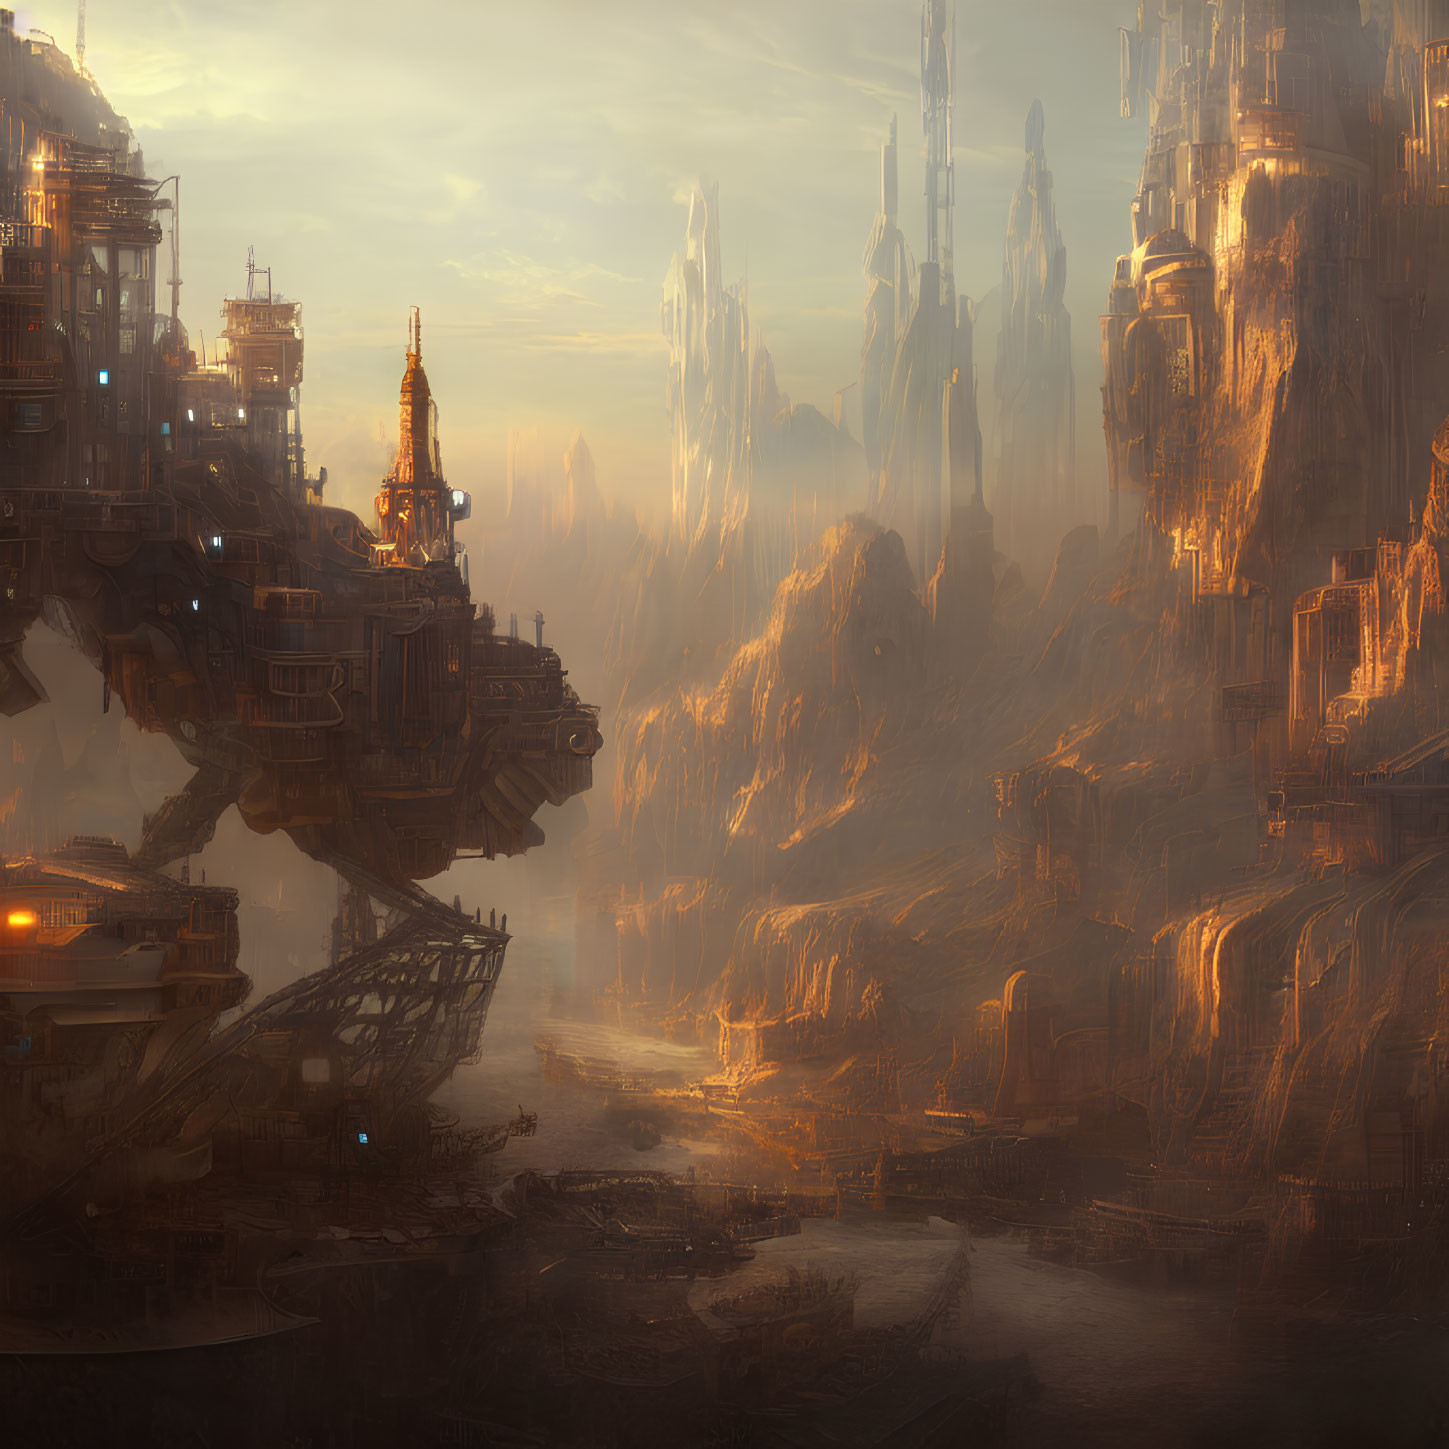 Futuristic cityscape with towering structures and cliffs in golden light